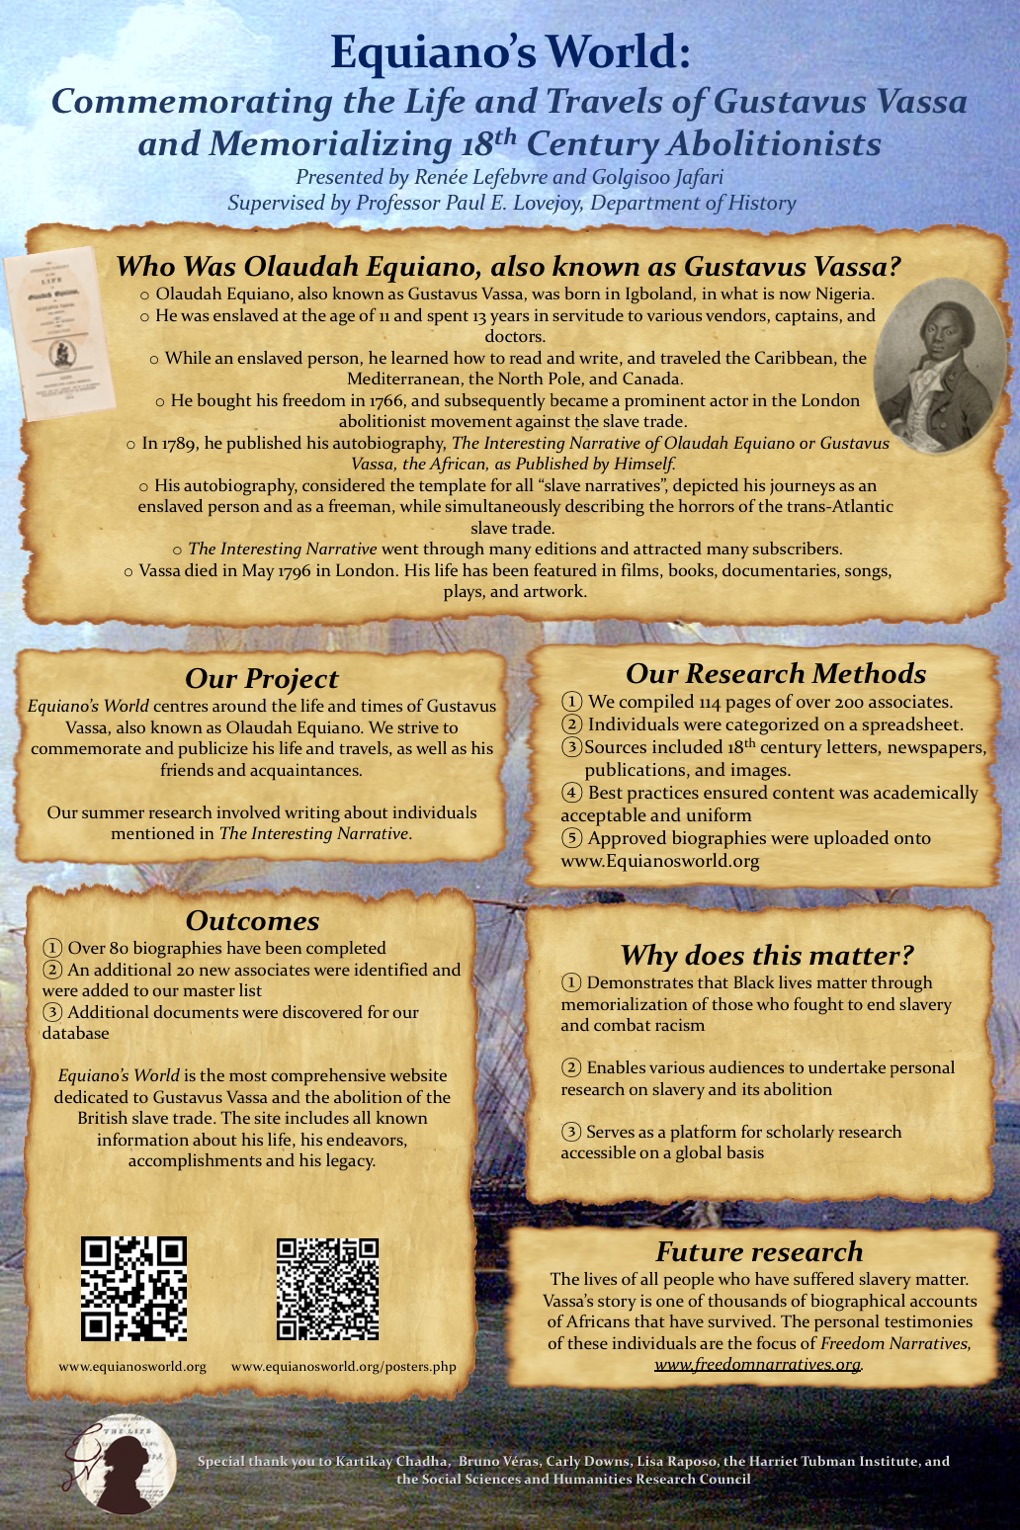 Image of Equianoâ€™s World:  Commemorating the Life and Travels of Gustavus Vassa and Memorializing 18th Century Abolitionists